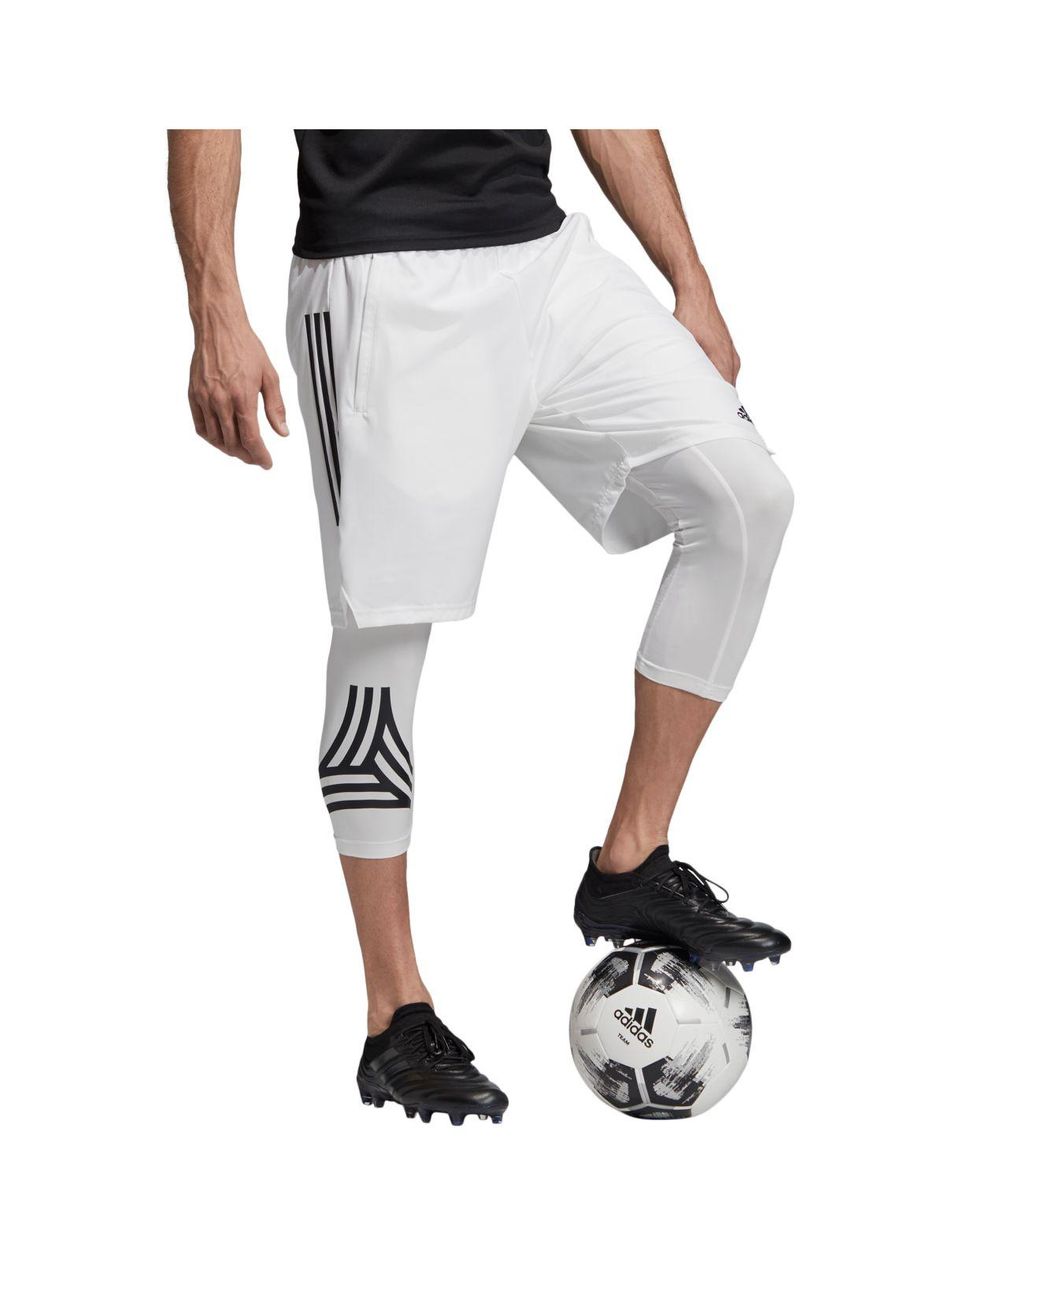 adidas Soccer Shorts With Built In Running Tights in White for Men